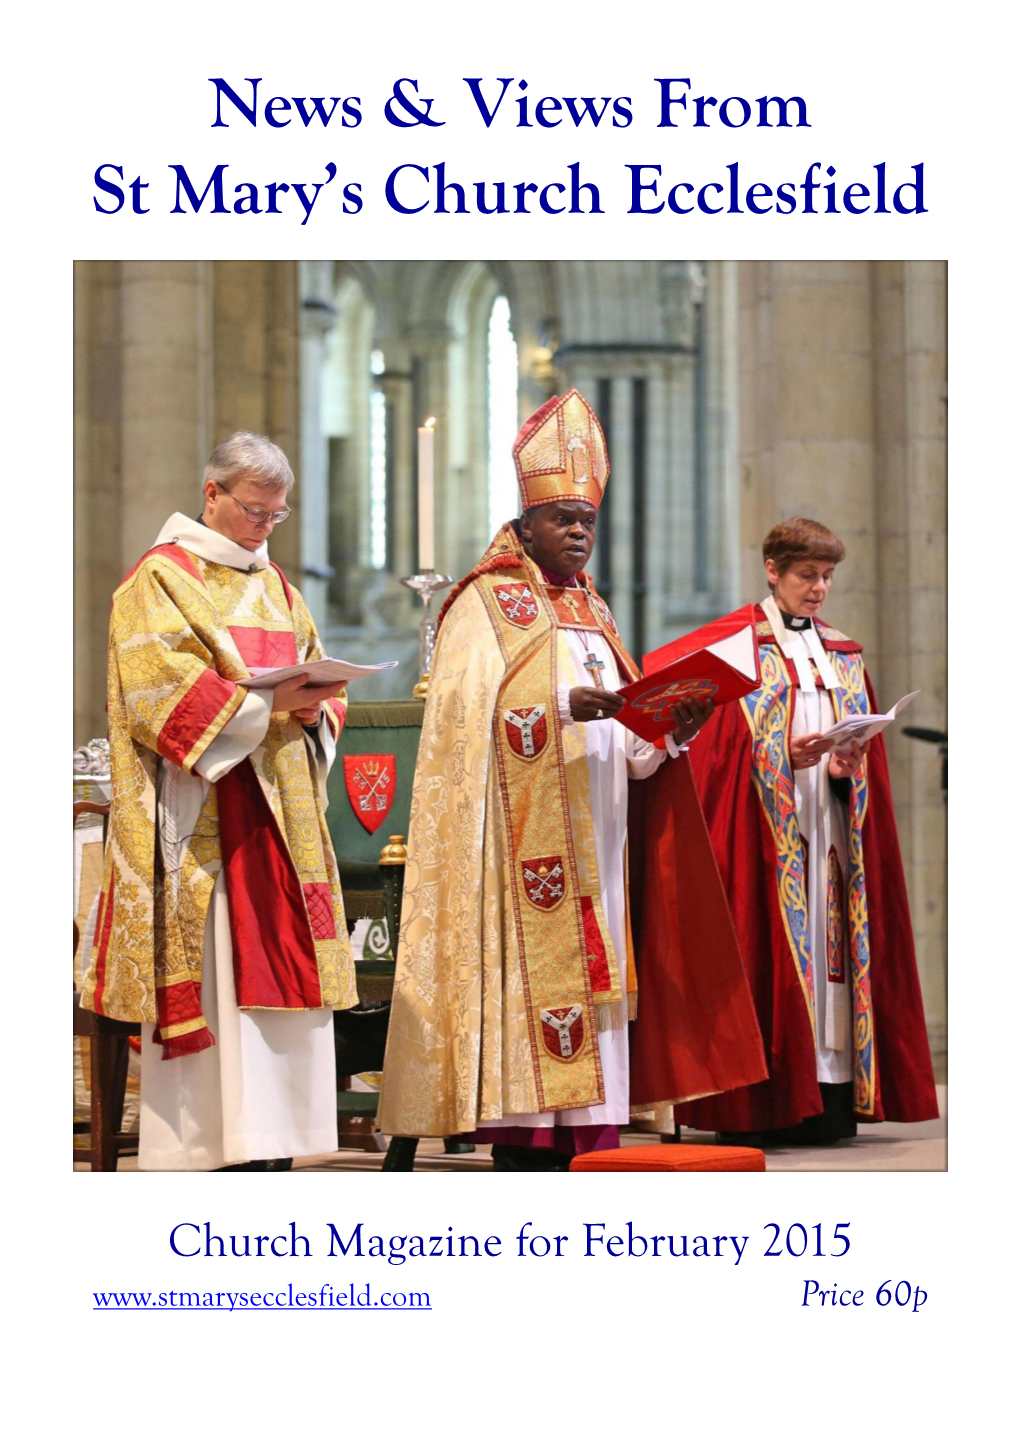 Front Cover – Consecration of Church of England's First Female Bishop Rev Libby Lane at York Minster Back Cover – MU Coffee Morning & Eppic Posters